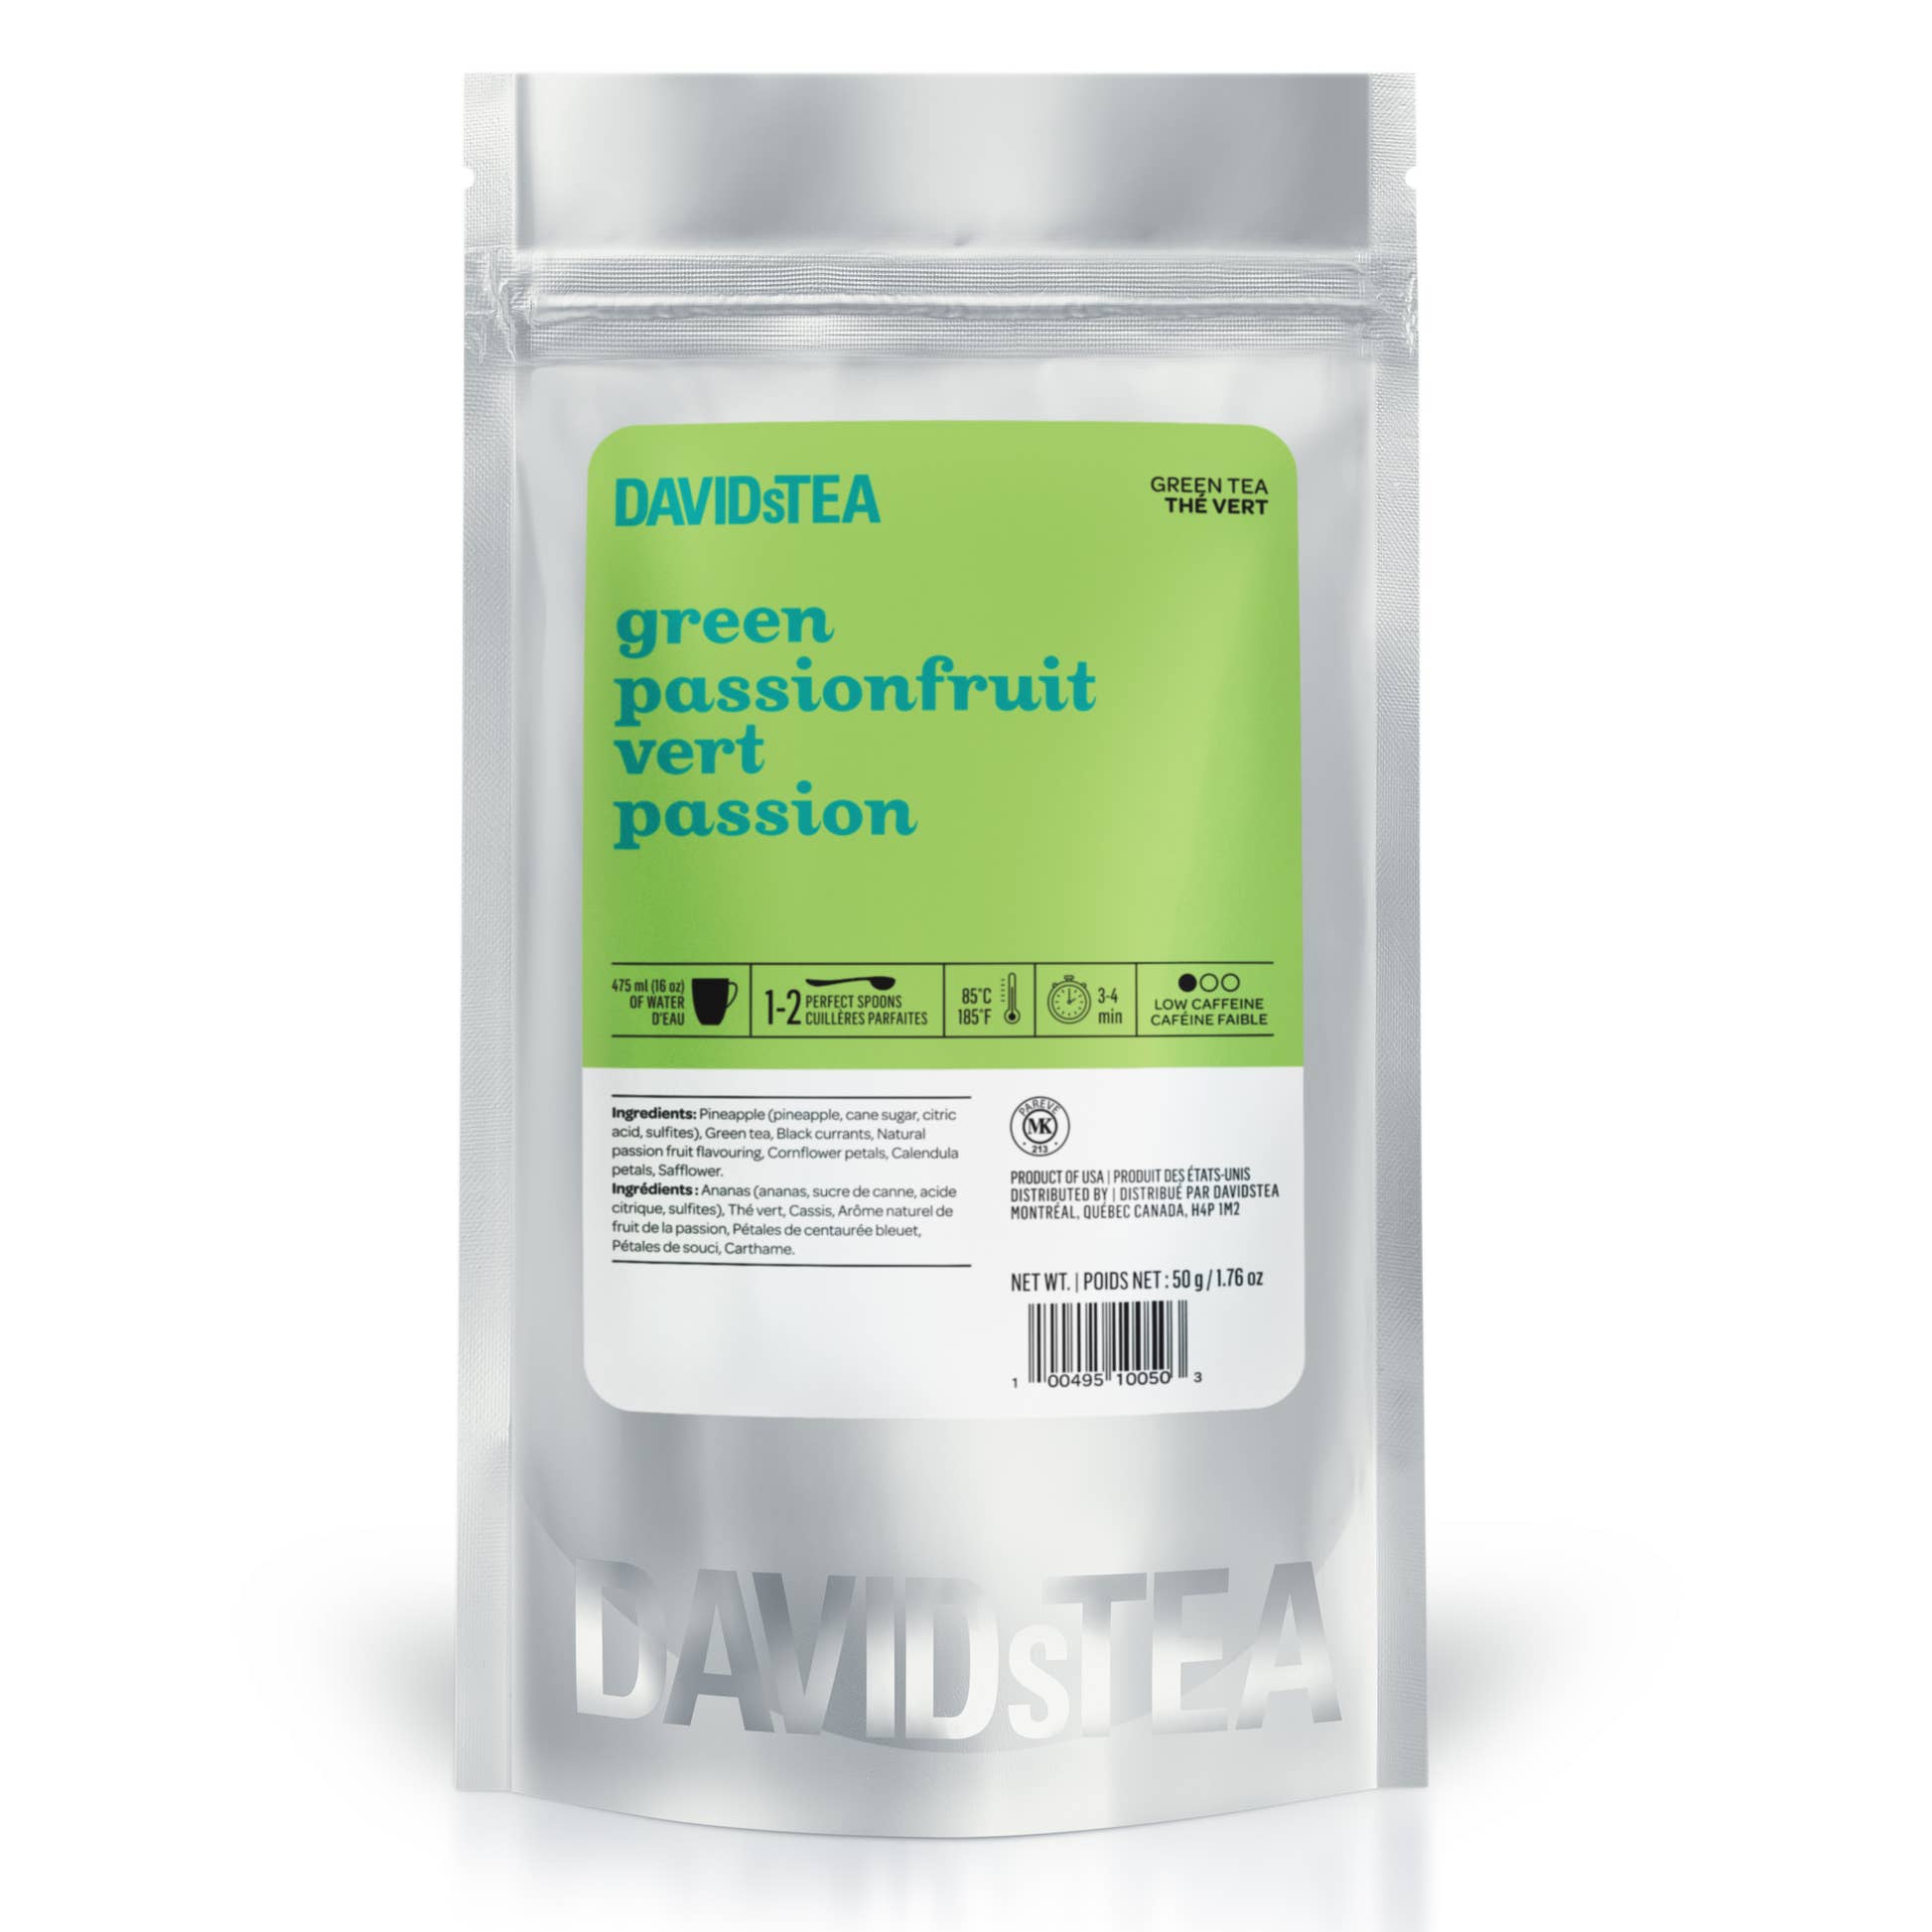 green passionfruit sips by davidstea green tea blend loose leaf in silver pouch